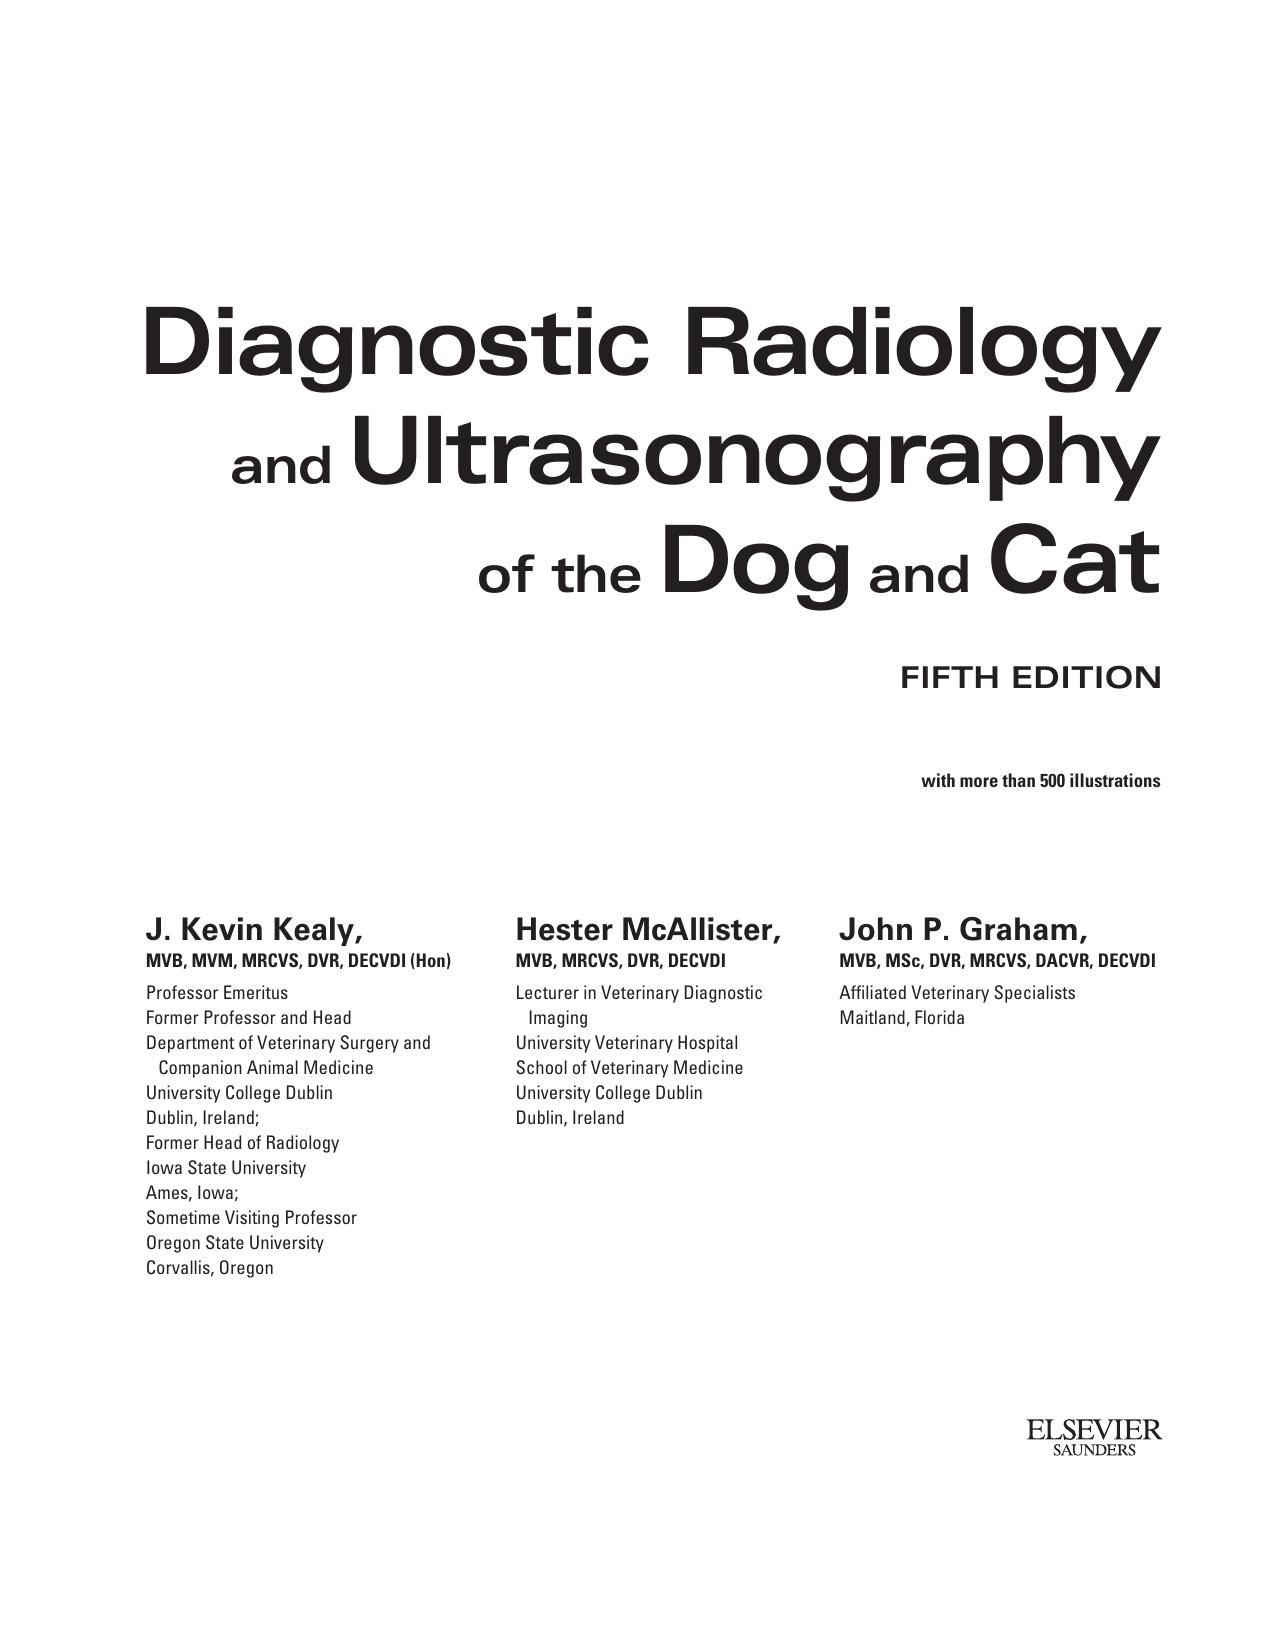 Diagnostic Radiology and Ultrasonography of the Dog and Cat, 5th Edition 2011